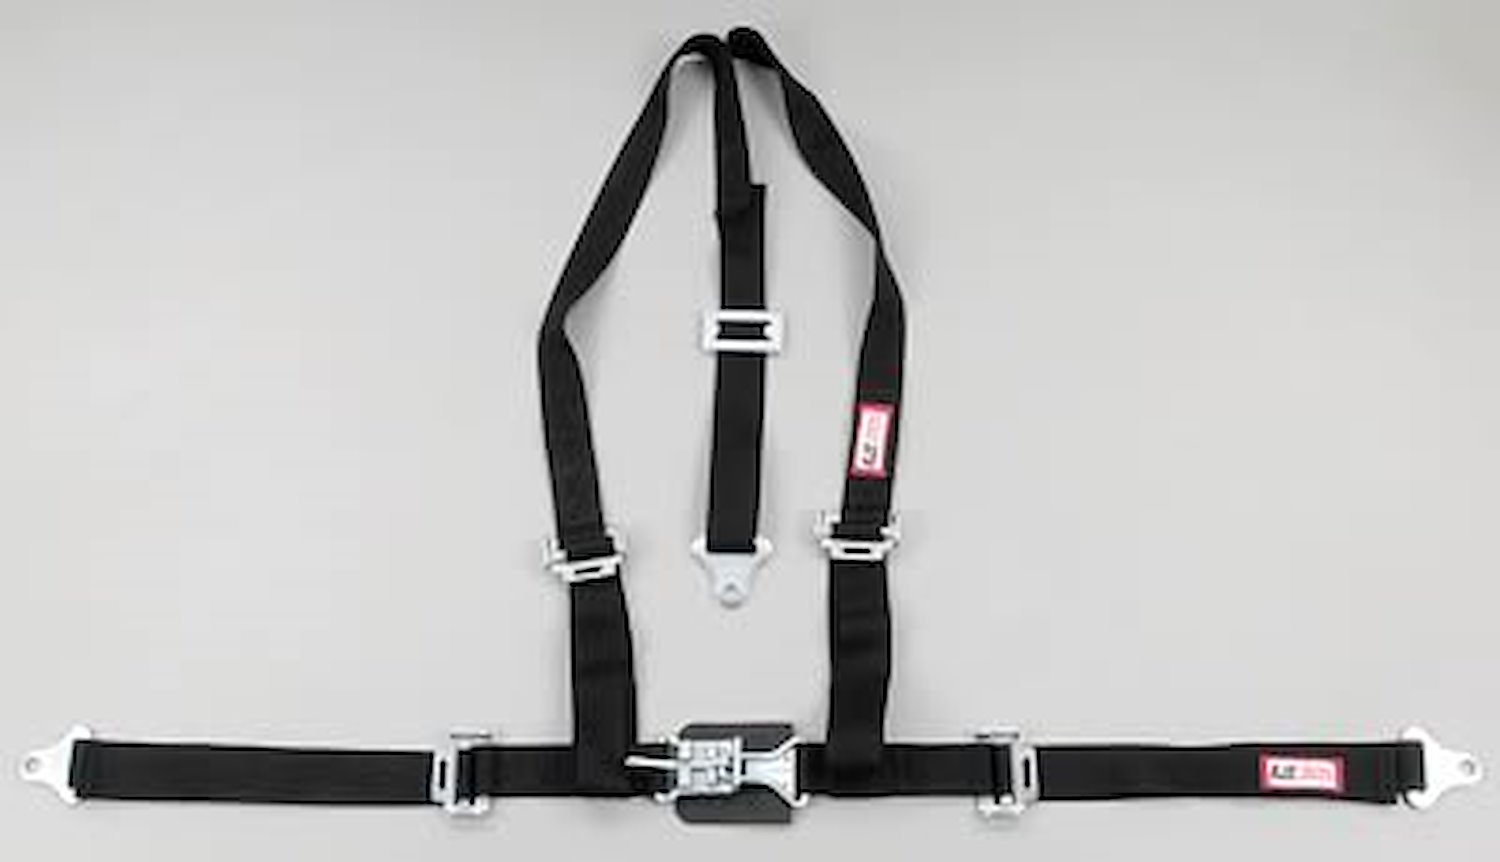 NON-SFI L&L HARNESS 3 PULL DOWN Lap Belt SEWN IN 2 Shoulder Harness V ROLL BAR Mount ALL BOLT ENDS GRAY